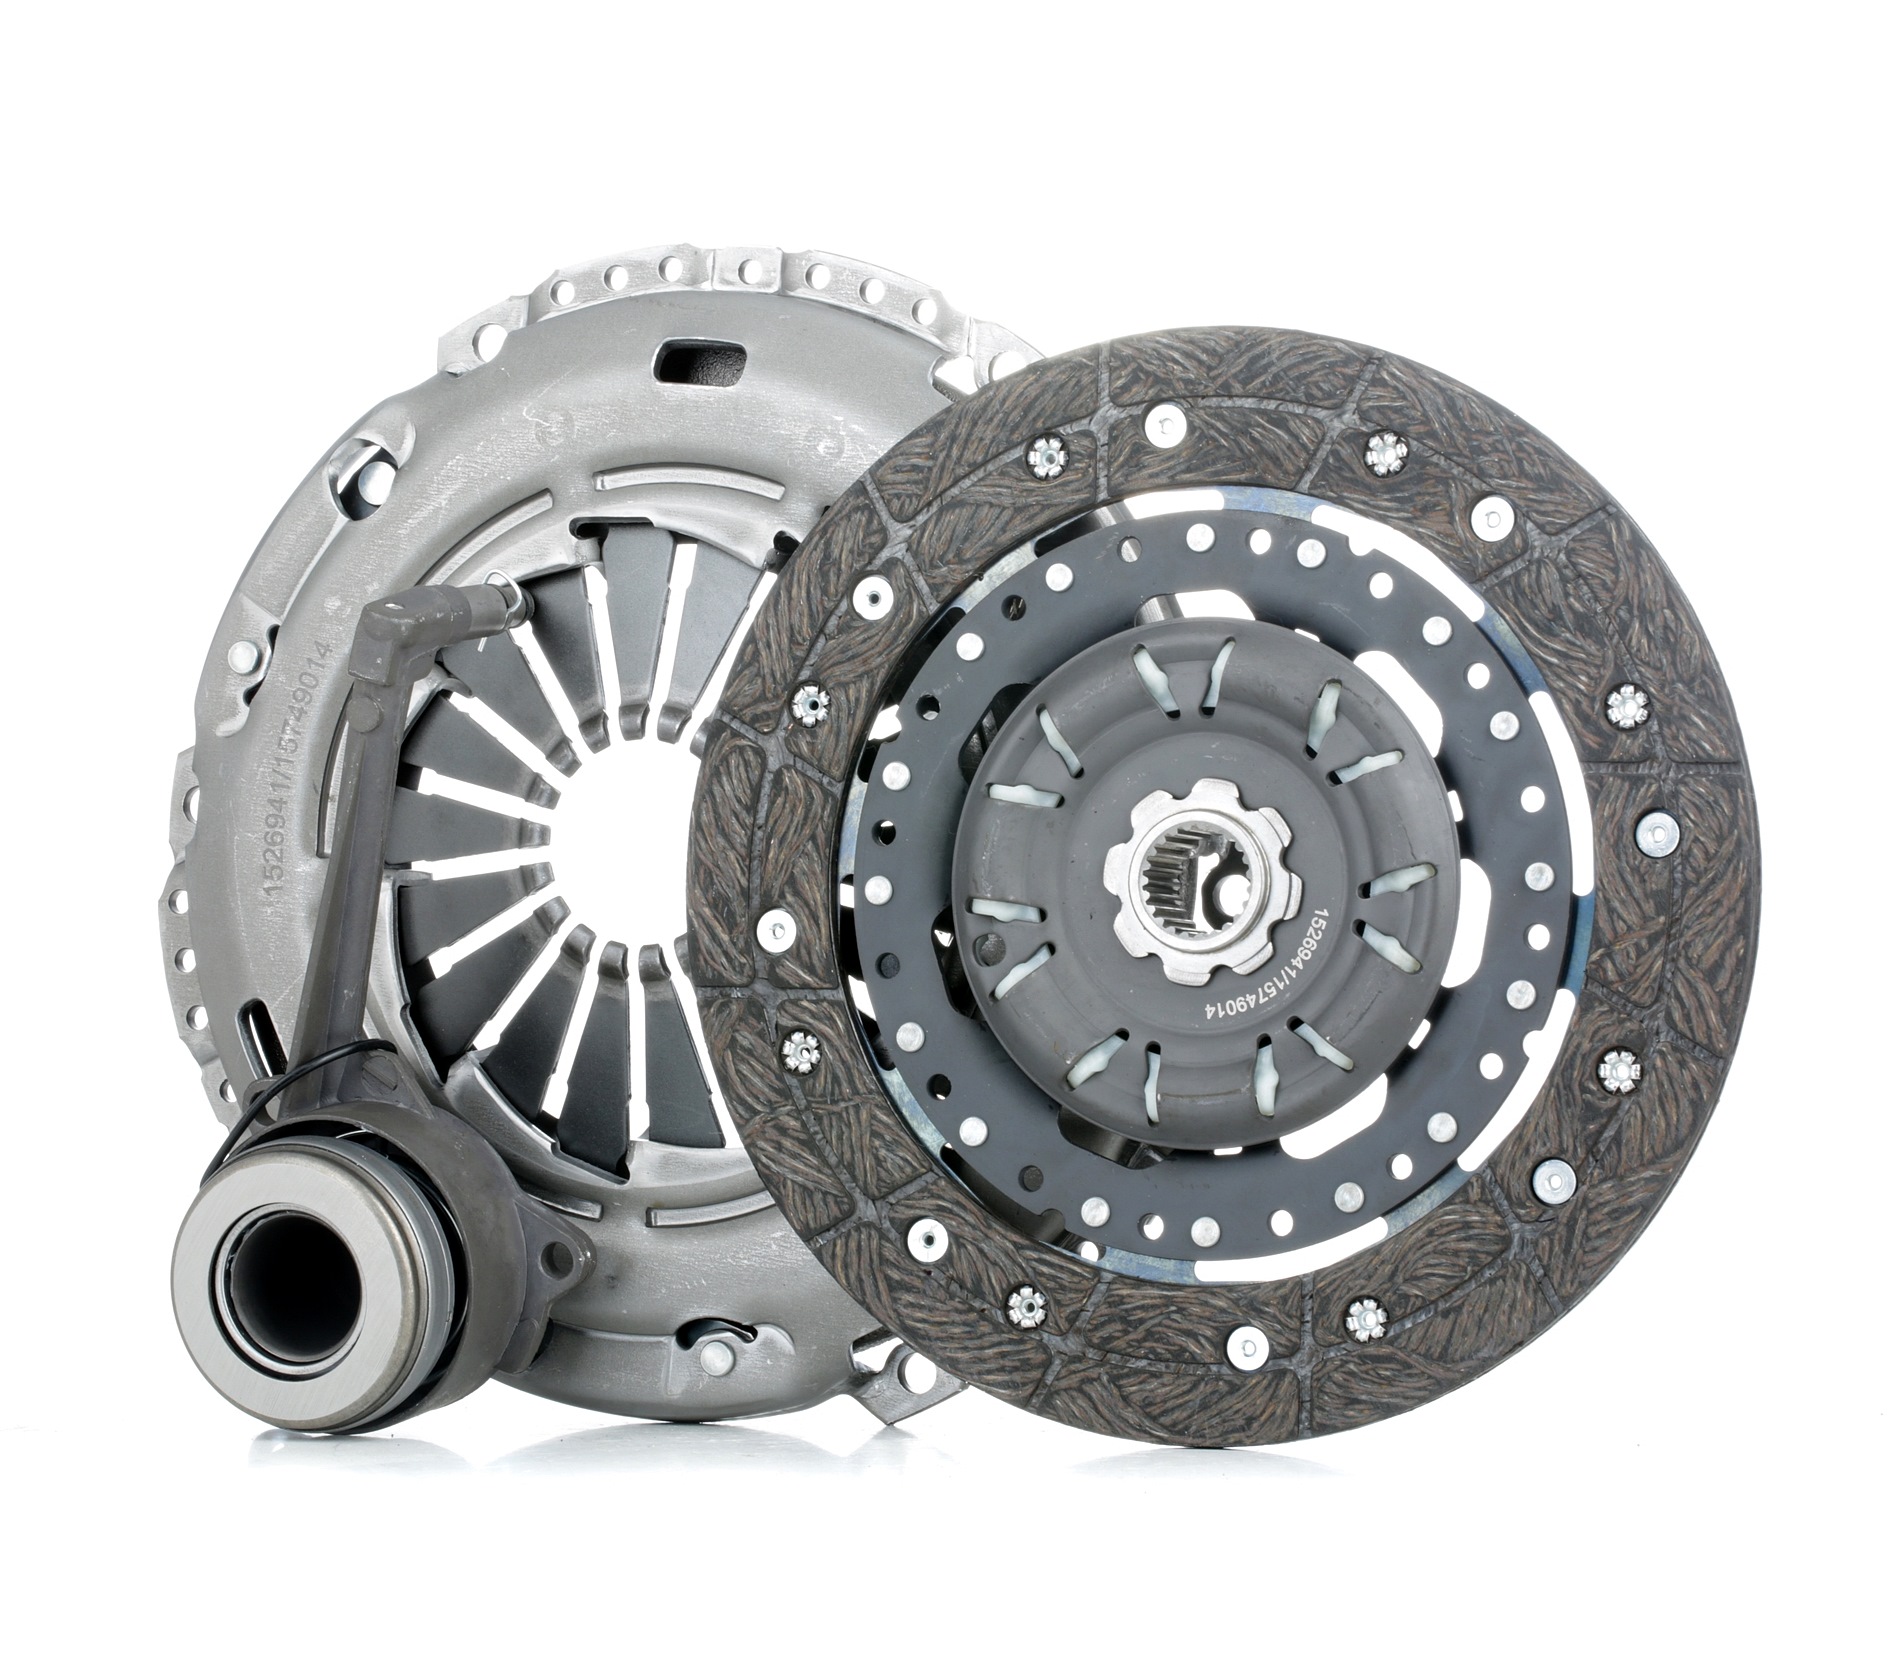 RIDEX 479C0882 Clutch kit three-piece, with central slave cylinder, with clutch pressure plate, with clutch disc, 240mm